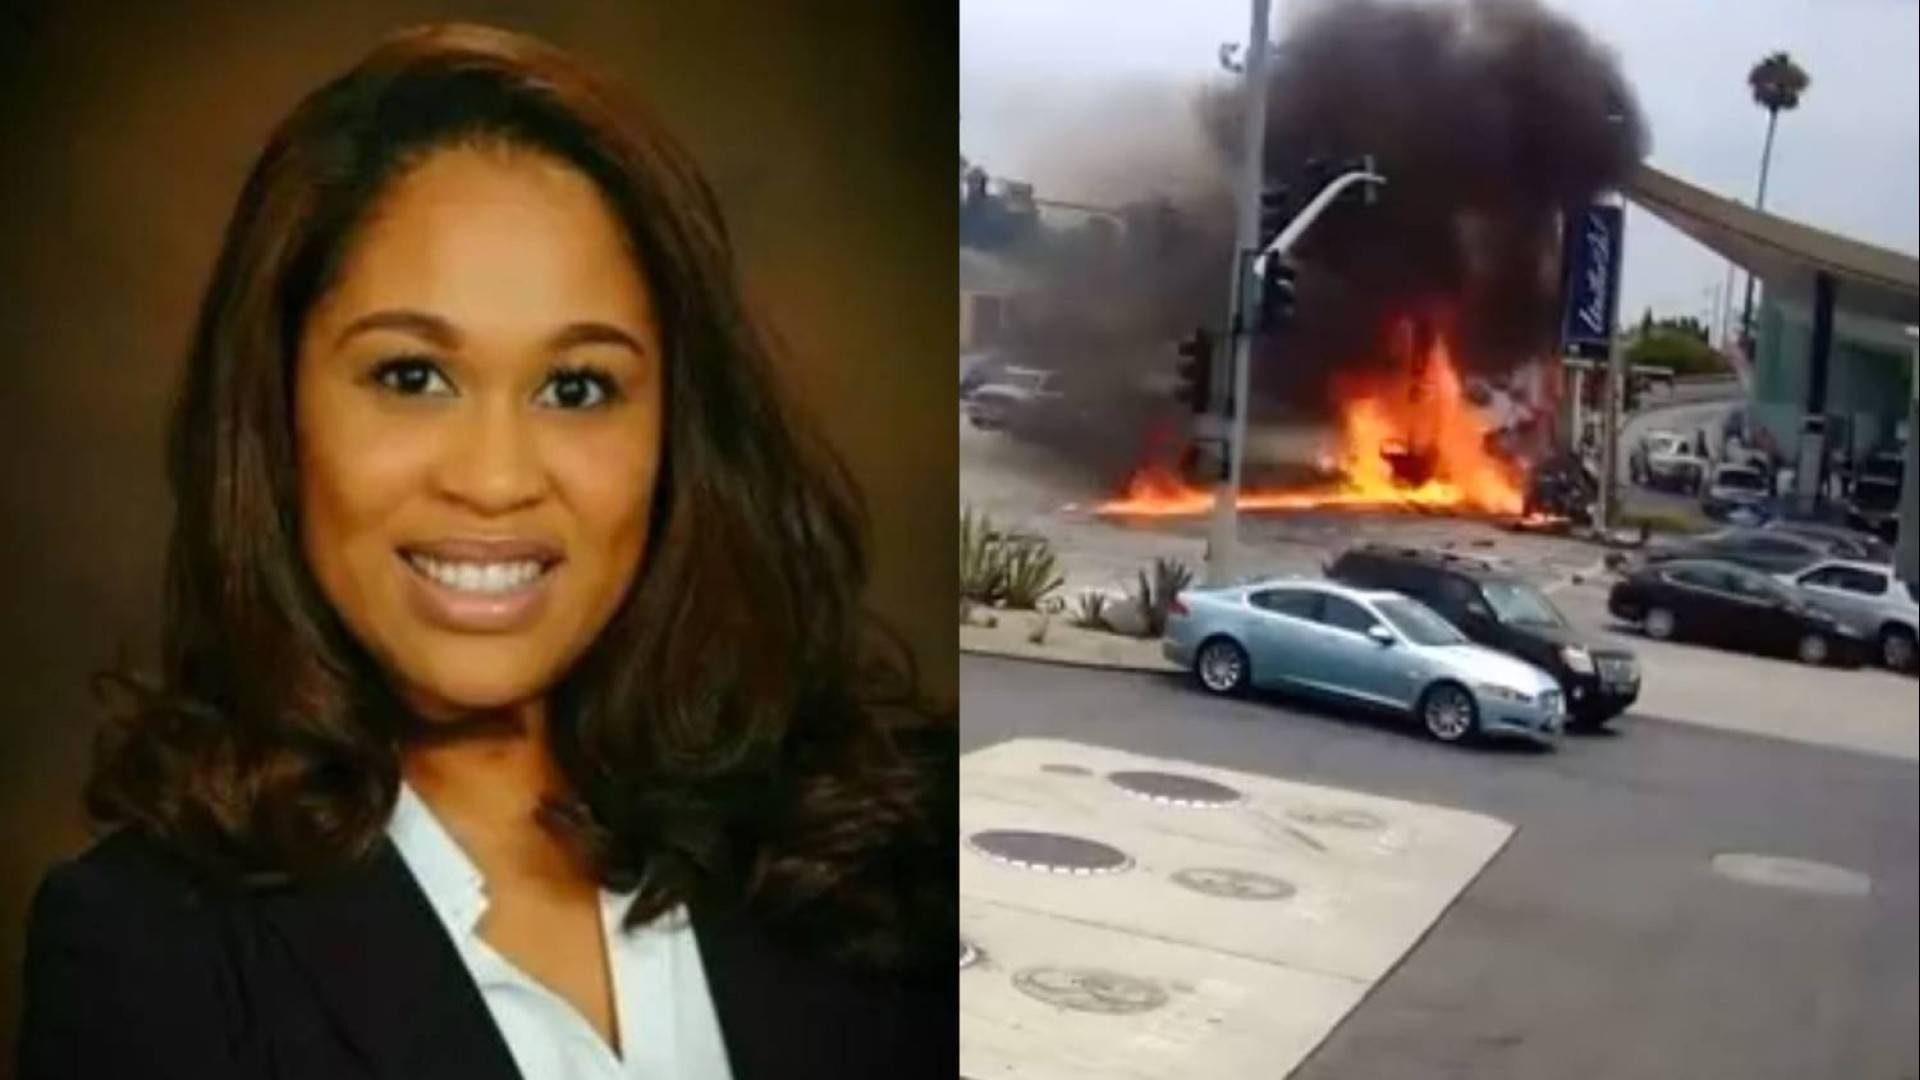 Nicole Linton, Woman Who Allegedly Killed Six In Fiery L.A. Car